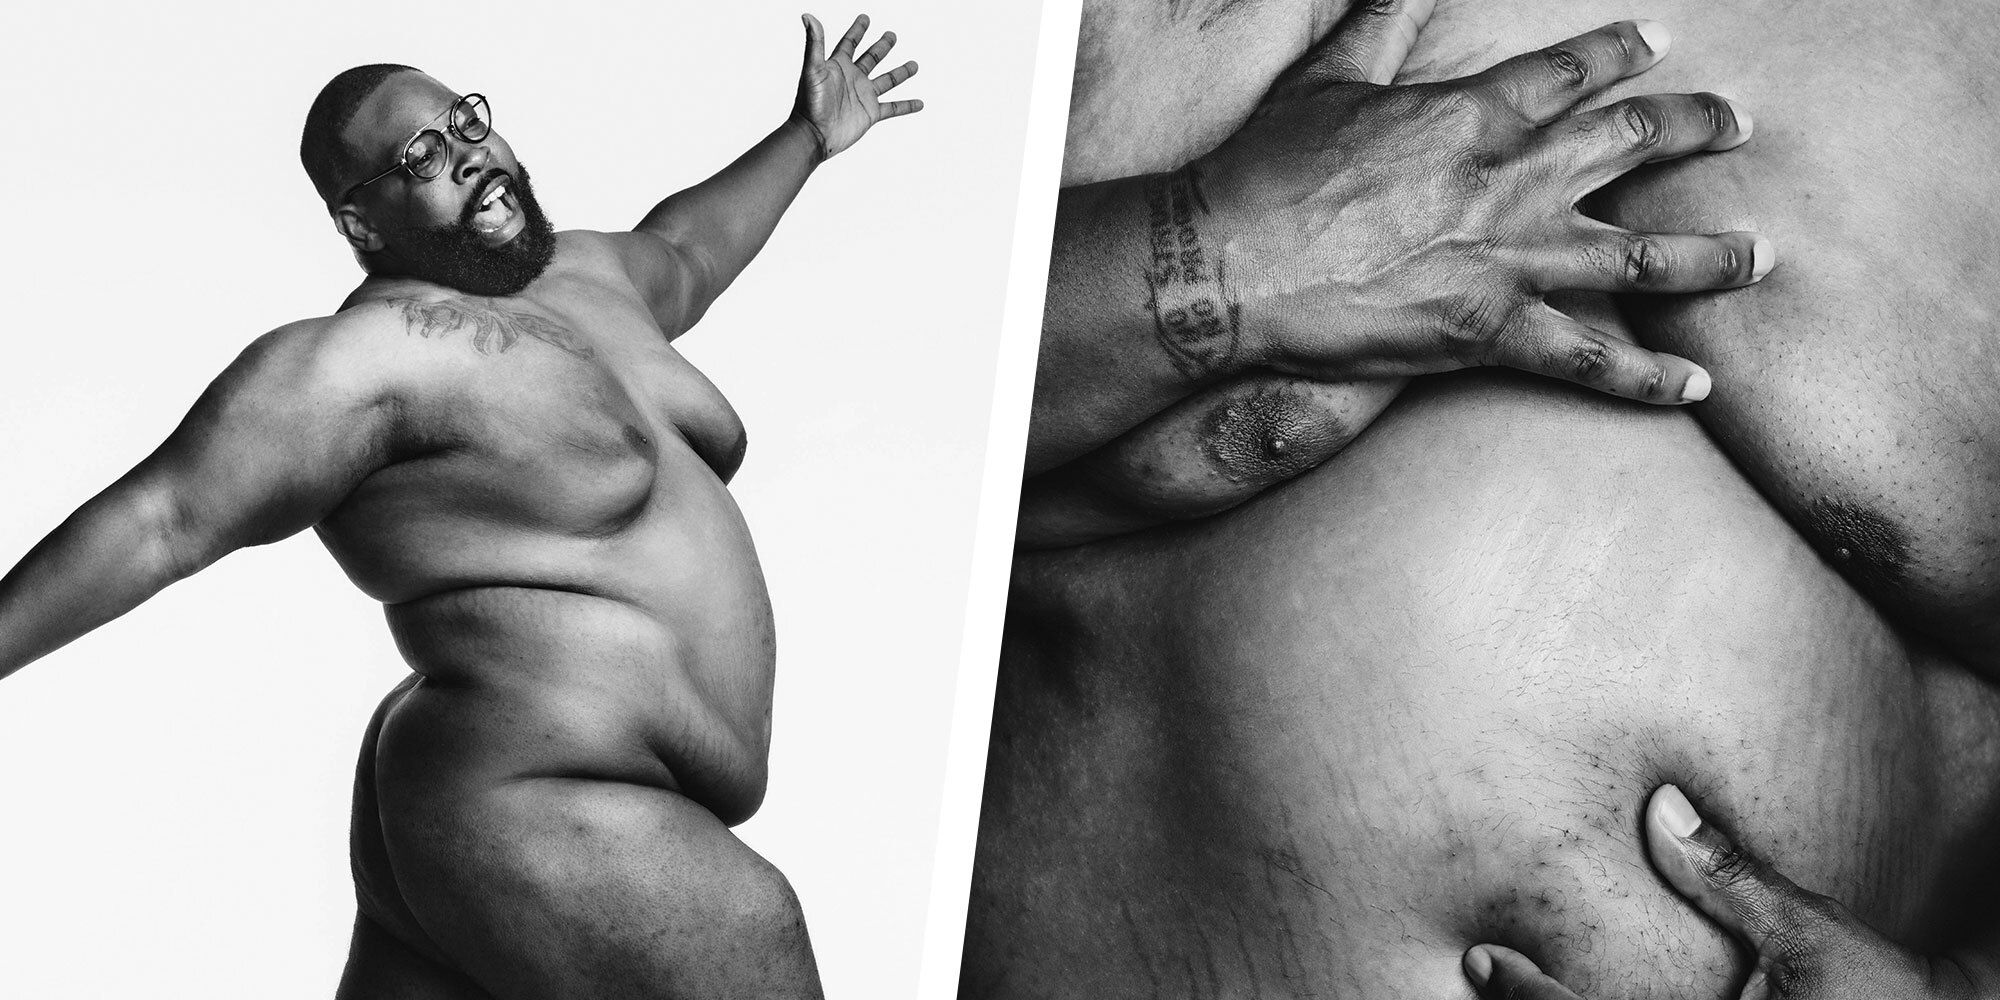 Martinus Evans, The 300-Pound Runner, Is Crushing Fitness Stereotypes pic